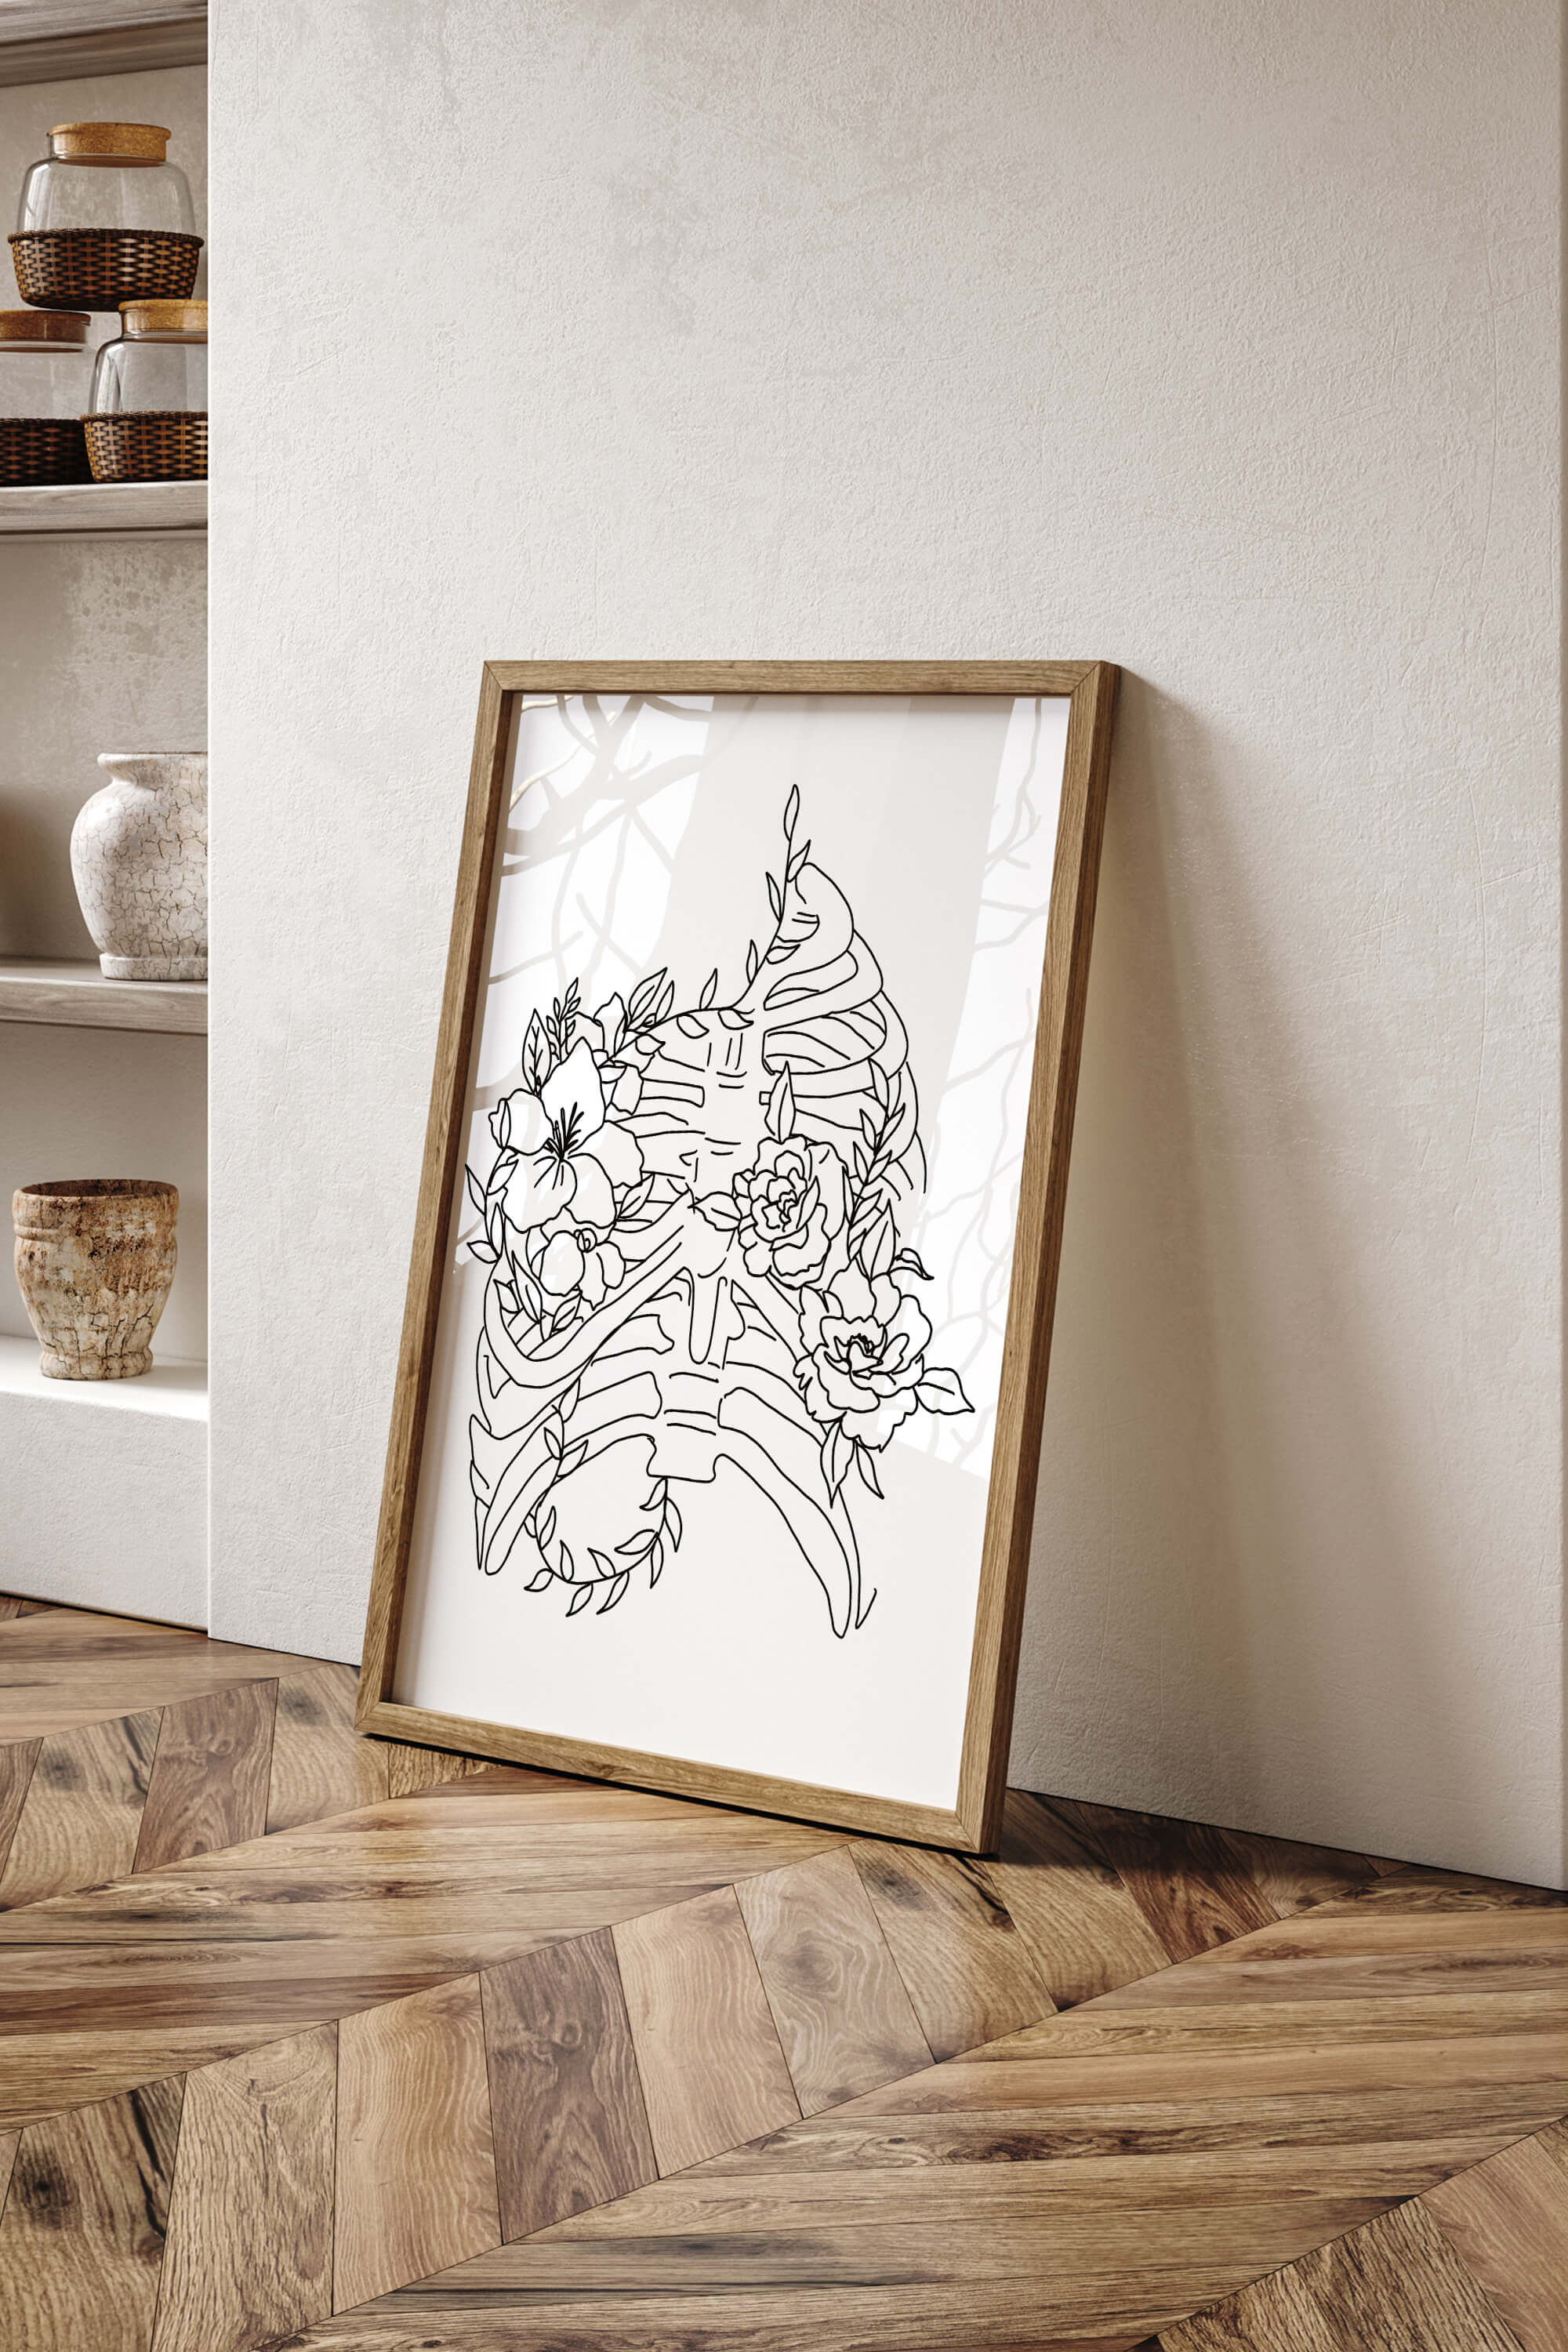 Serenity-inducing monochrome floral anatomy wall art. Upgrade your space with this timeless beauty, harmonizing with various decor styles.